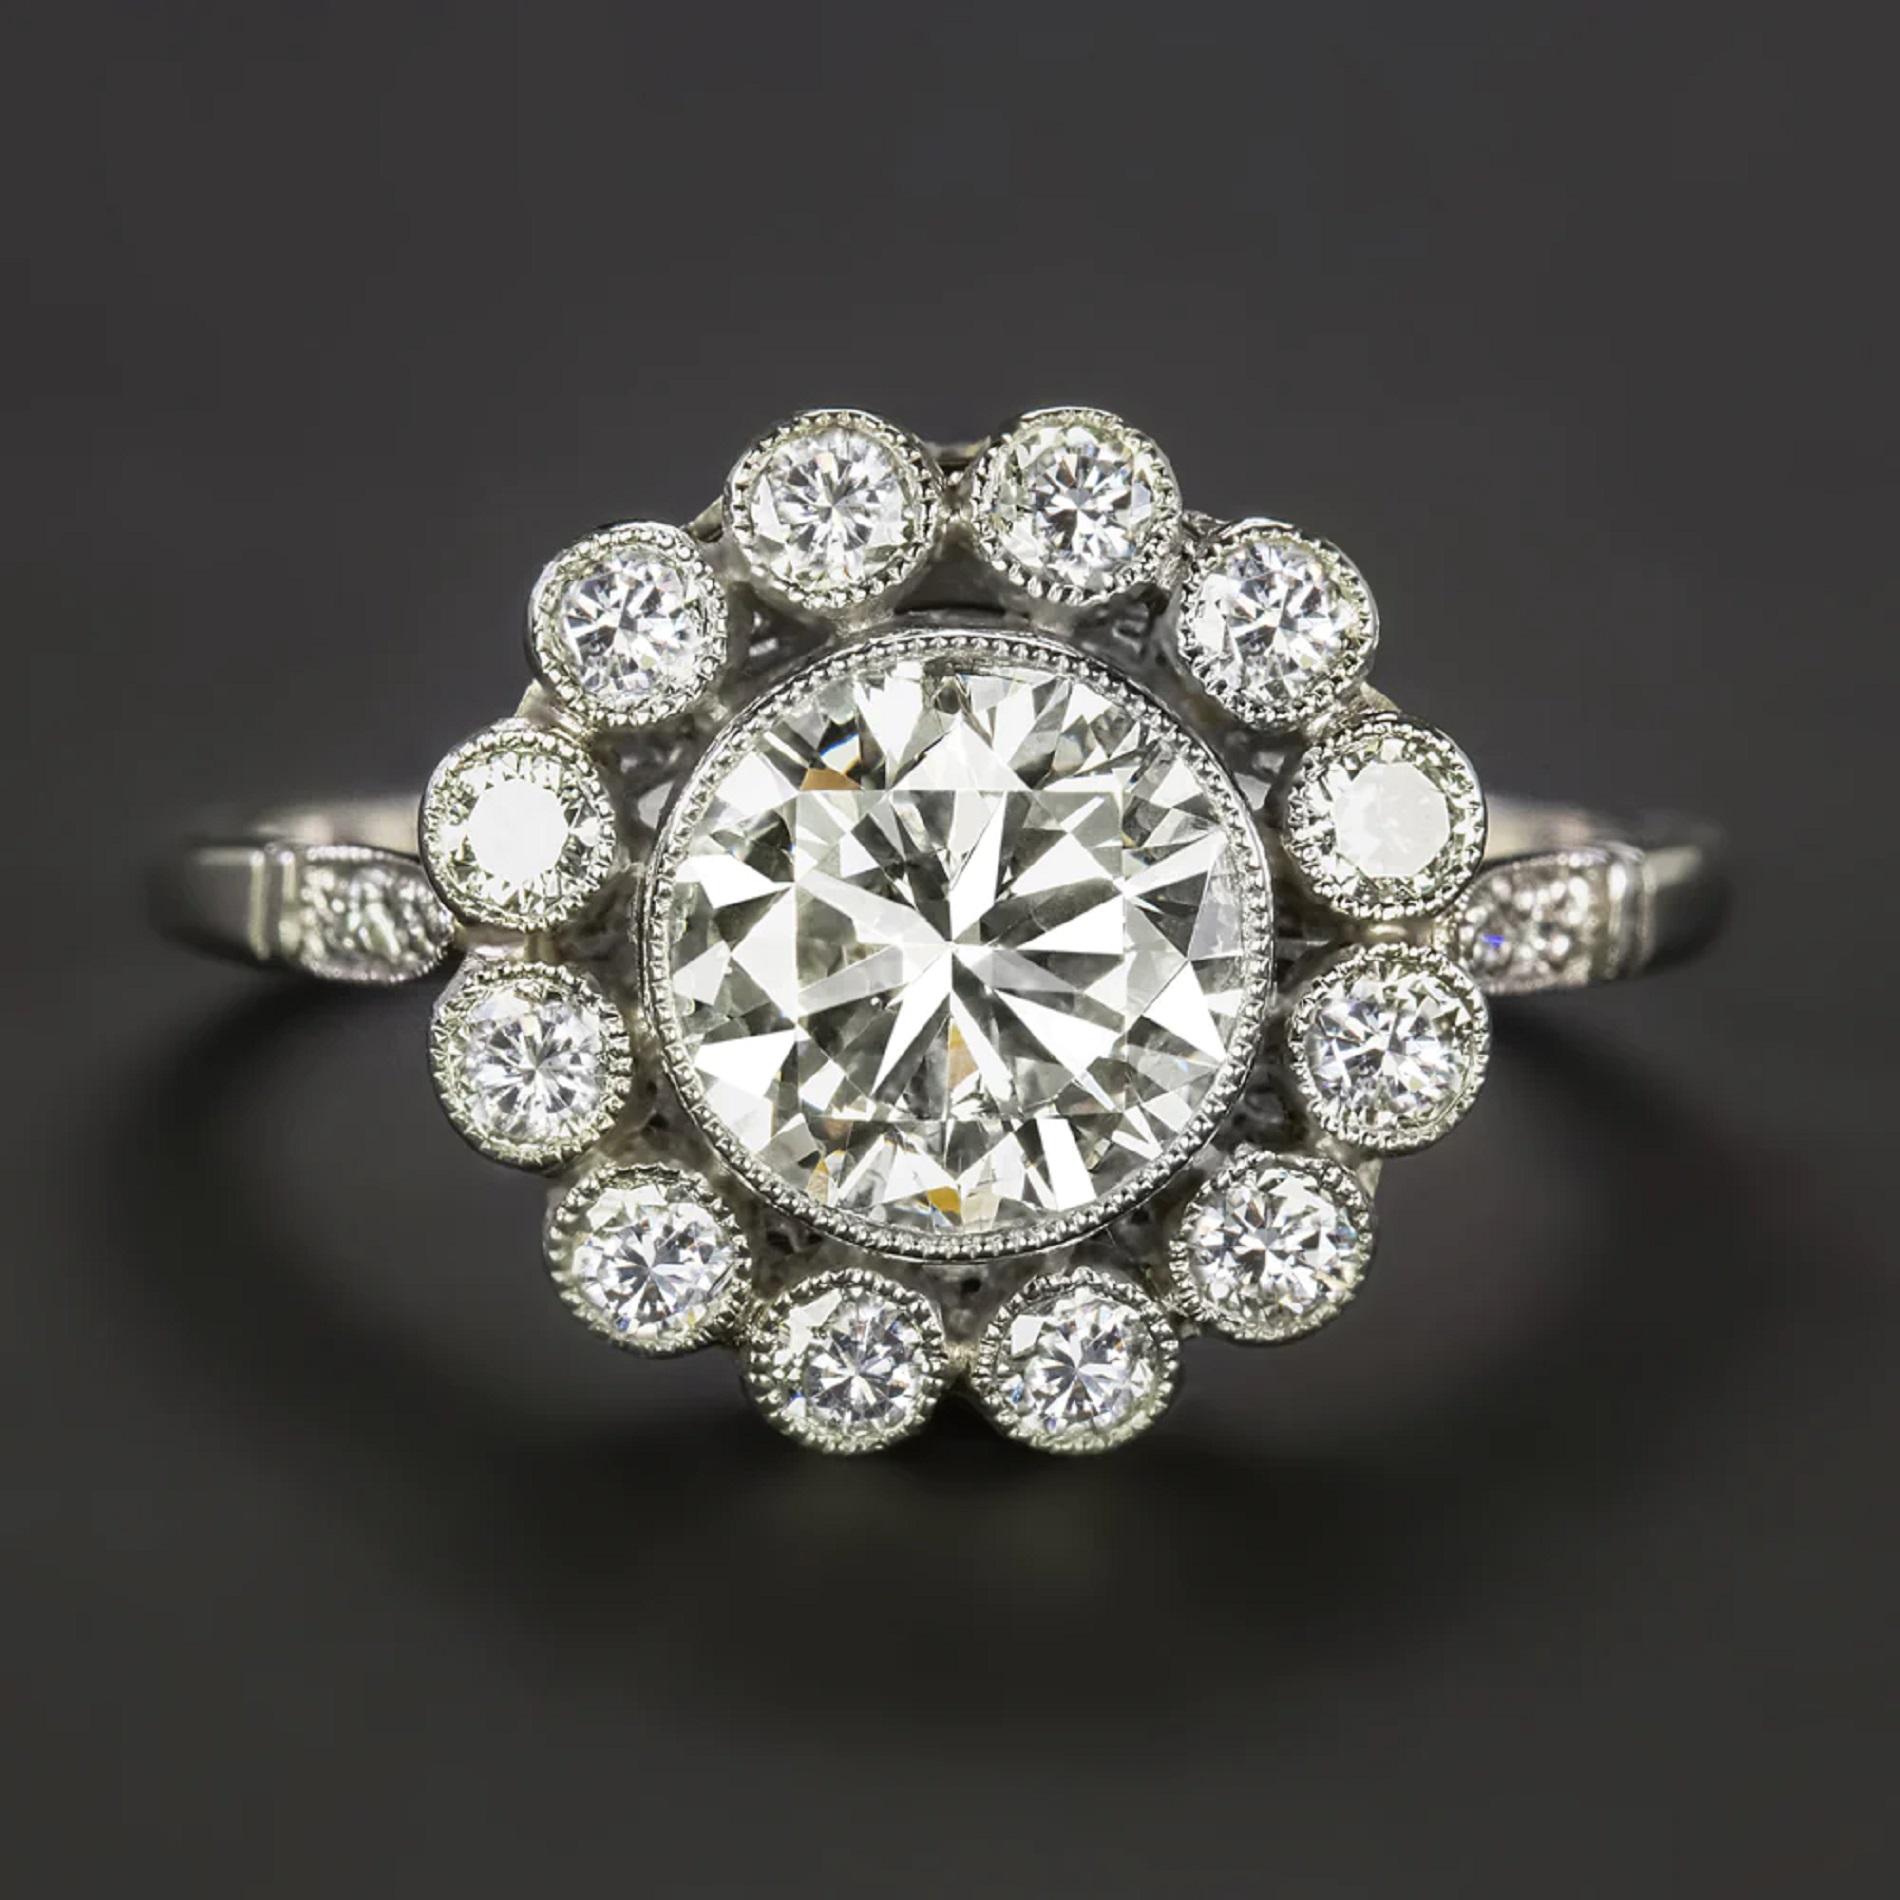 Art Deco EGL USA Certified 1.46 Carat Round Scalloped Diamond Ring For Sale